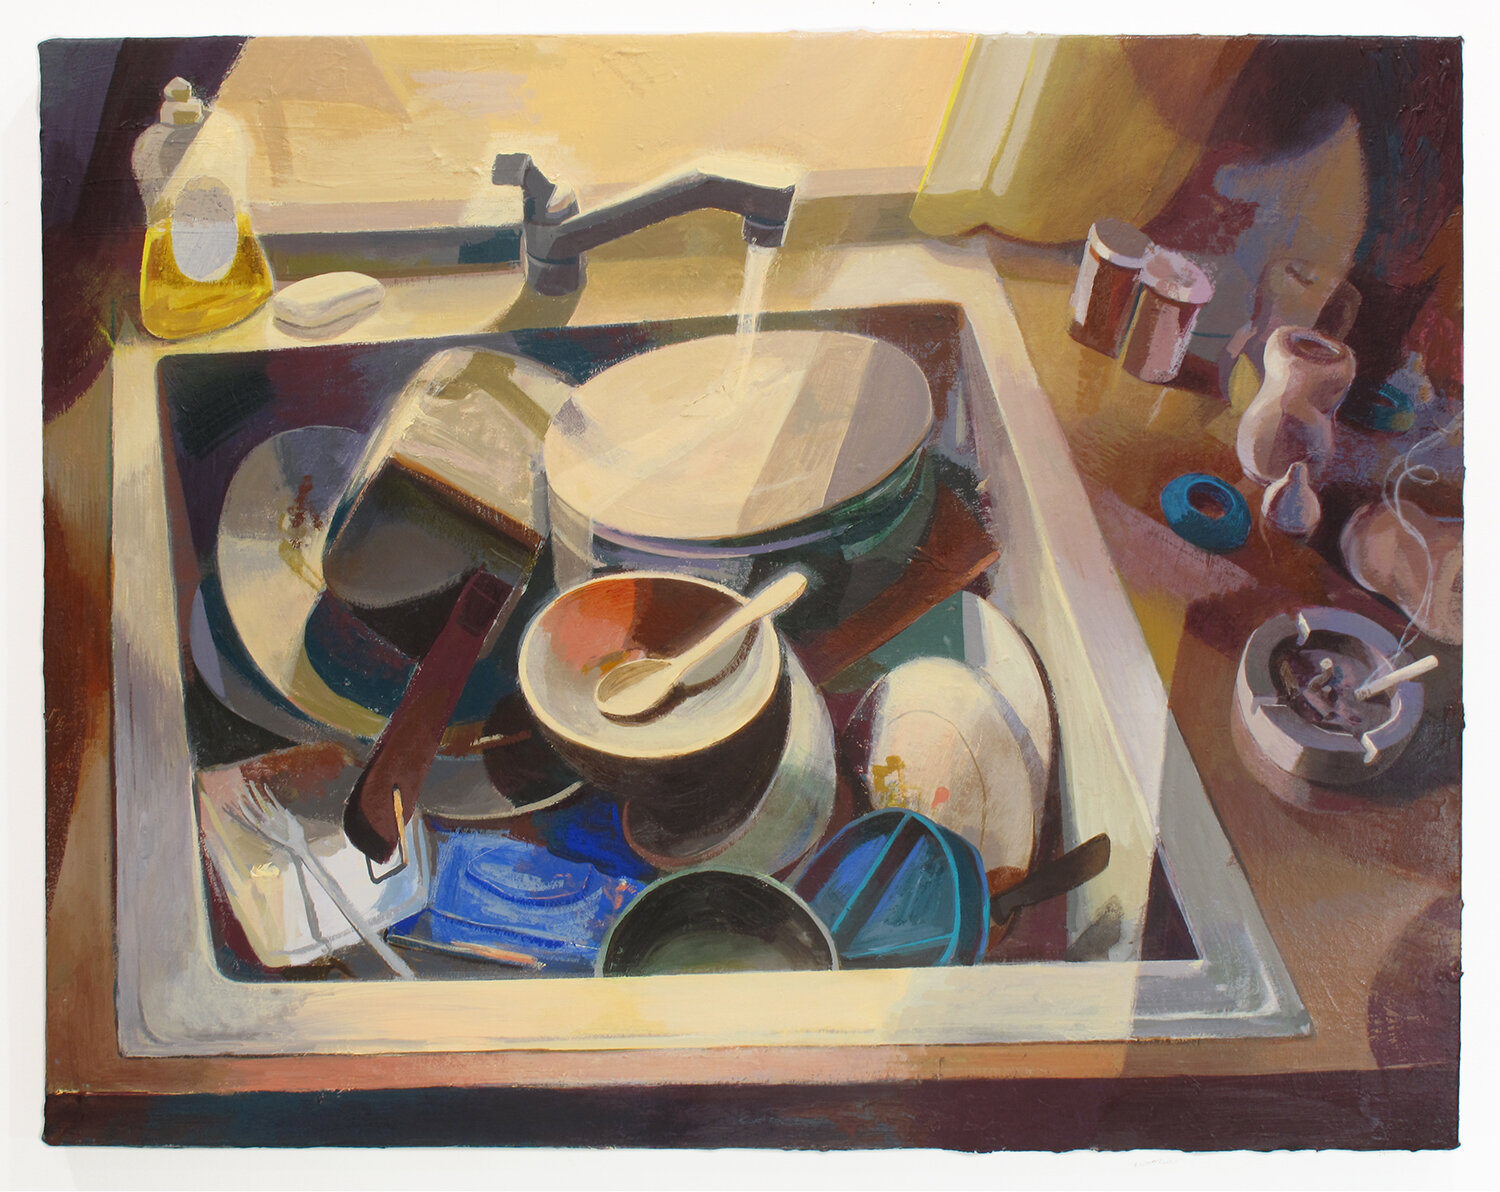   Dishes,  2021 , Flashe and acrylic on canvas, 28 x 36 in / 71.1 x 91.4 cm 